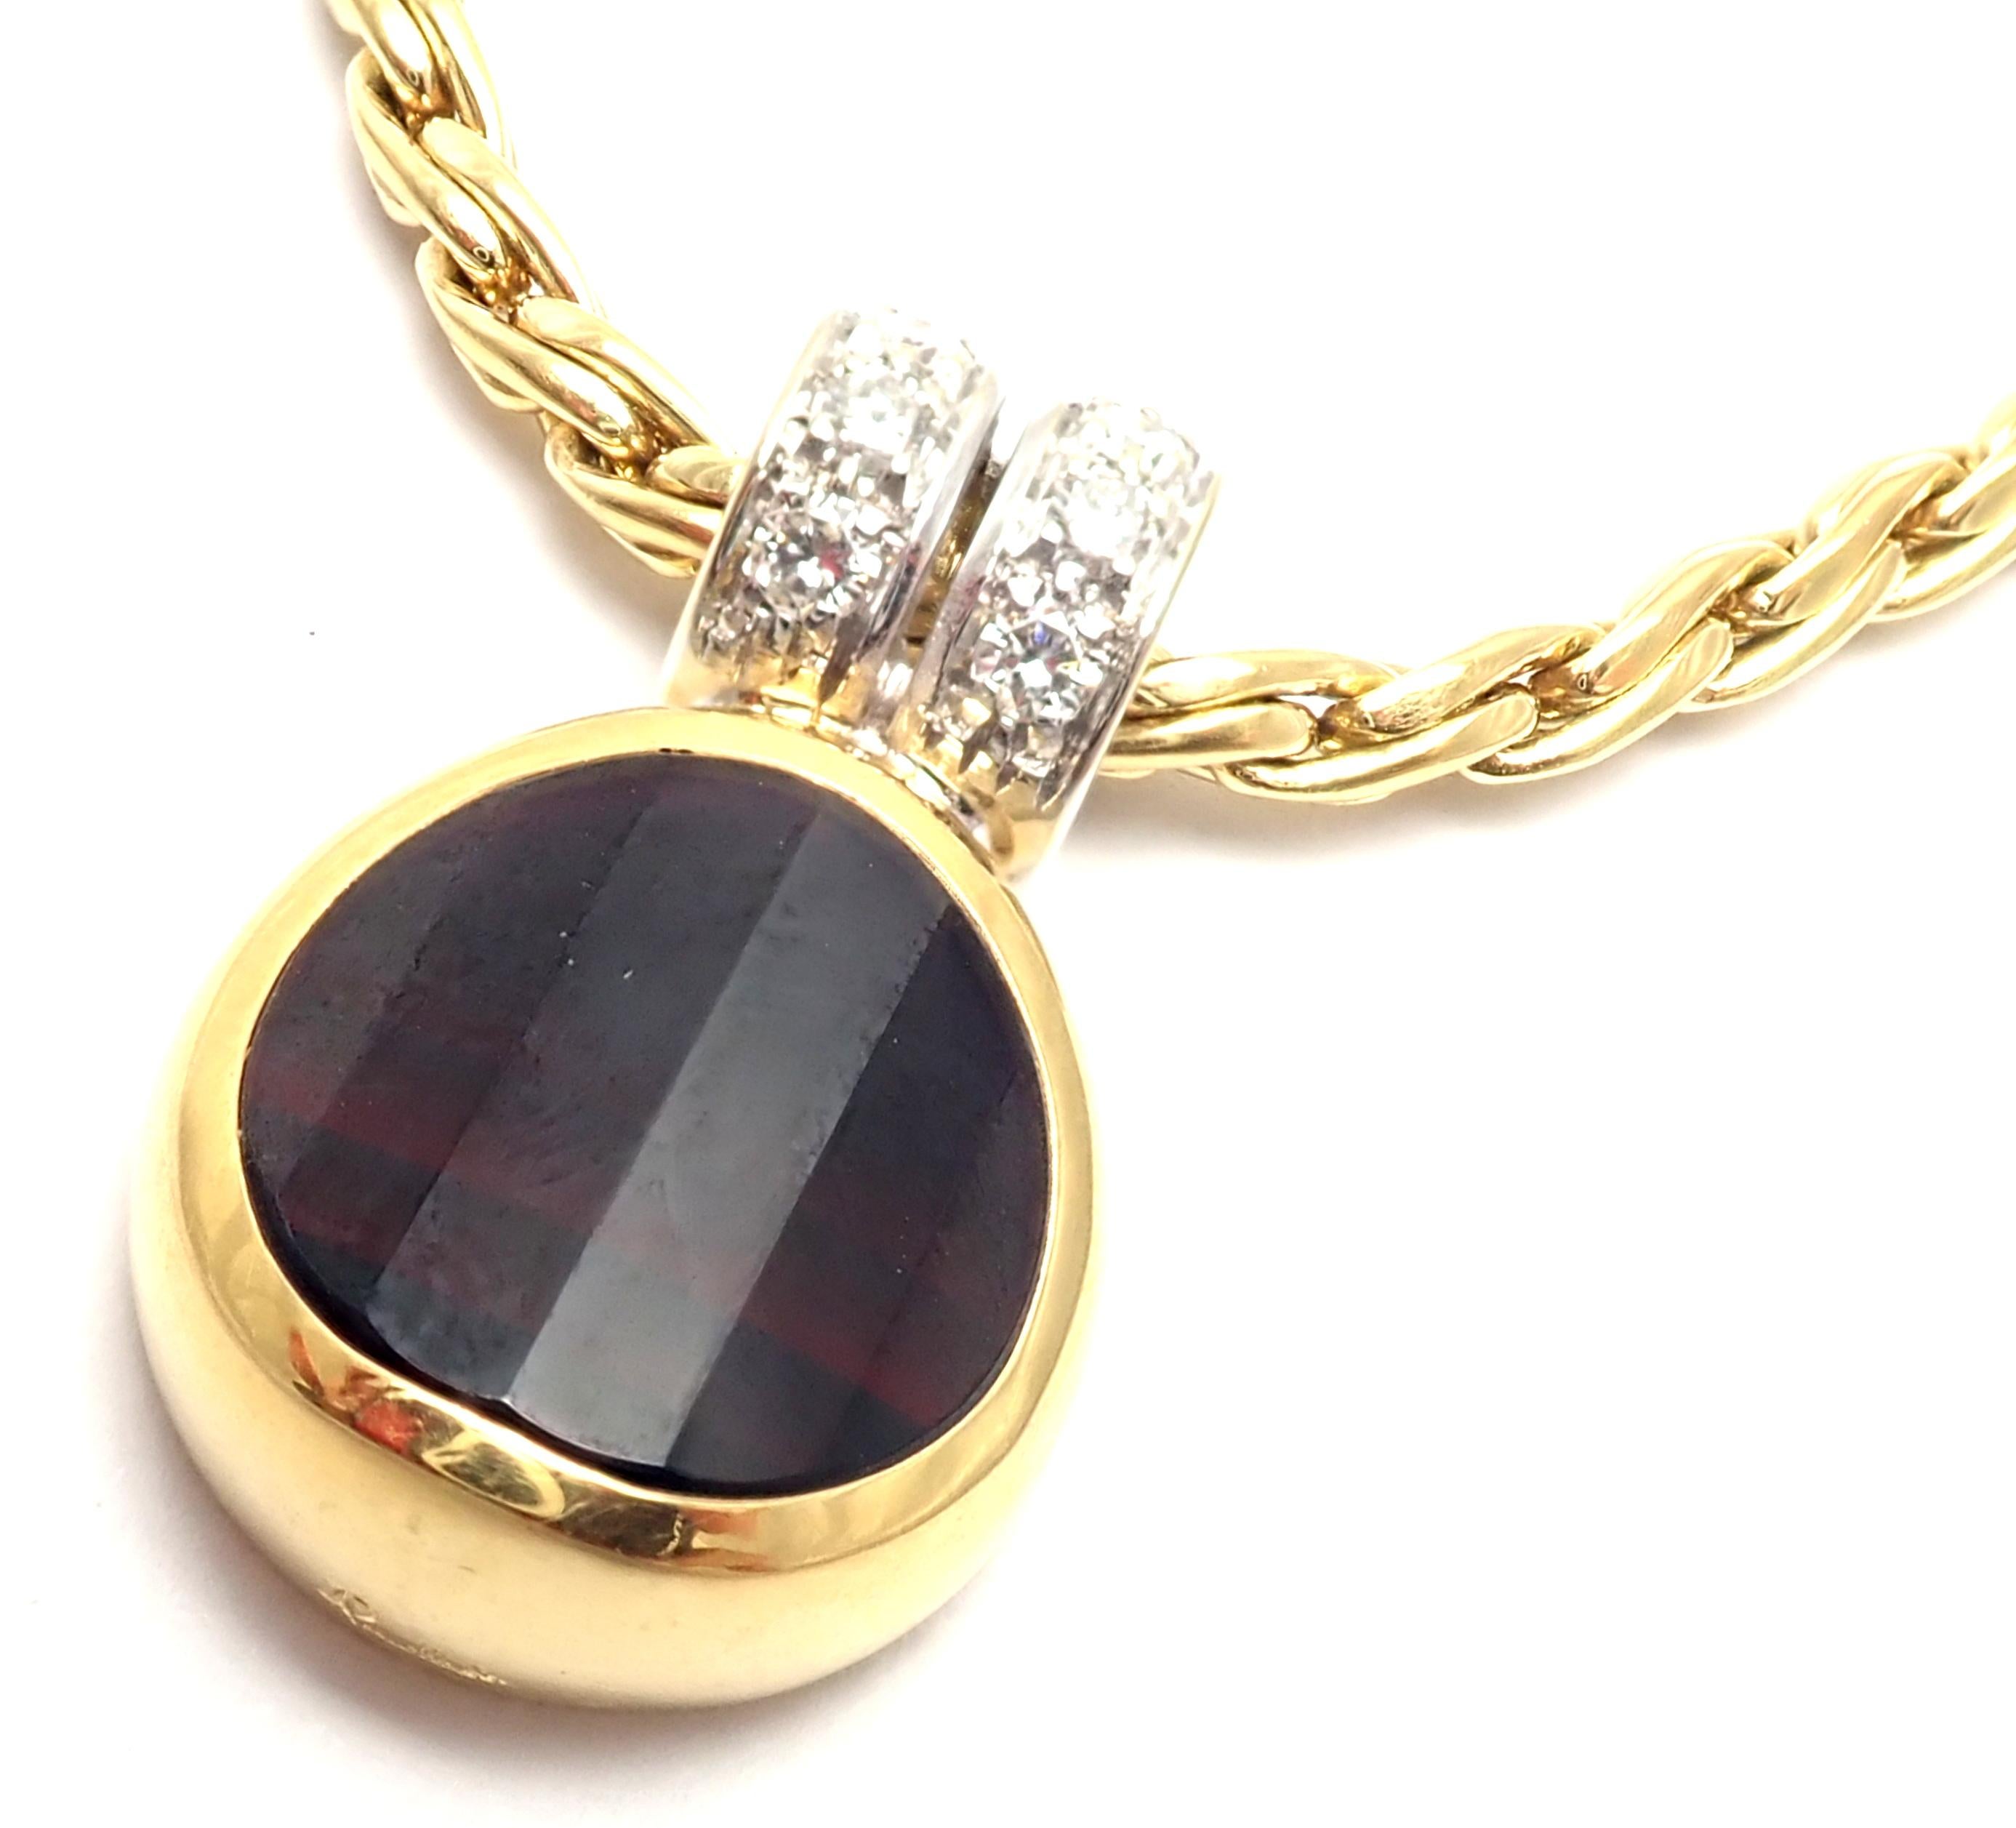 18k Yellow Gold Garnet Pendant Link Necklace by Pomellato. 
With 1 garnet 14mm x 13mm
8 round brilliant cut diamonds VS1 clarity, G color
total weight approx. .25ct
This necklace comes with original box.
Details: 
Weight: 31.3 grams
Chain - Length: